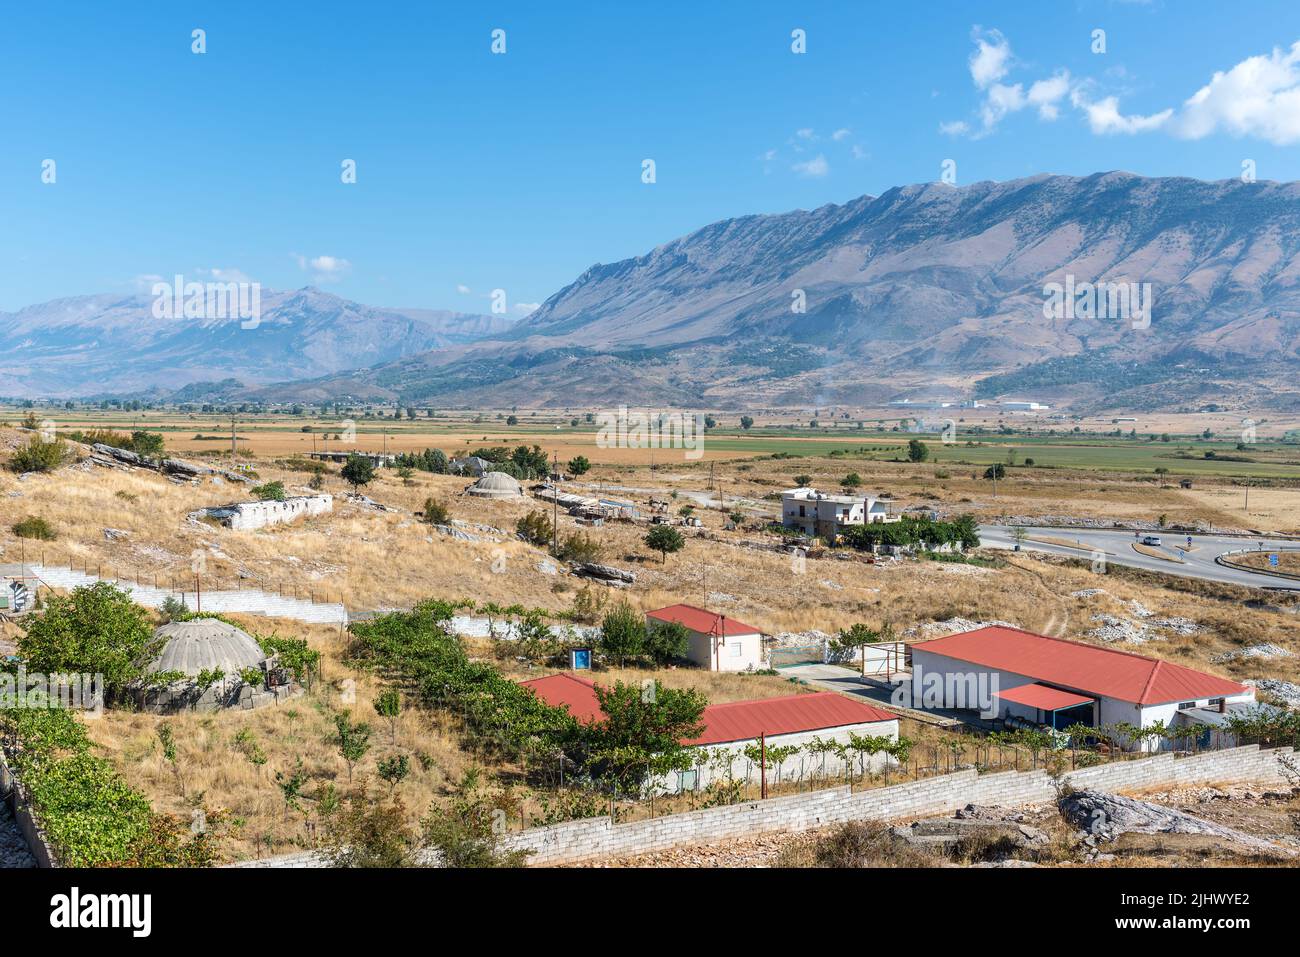 Jorgucat, Albania - September 10, 2021: Landscape with concrete military bunkers in Albania. The bunkers were built by during the cold war by the comm Stock Photo